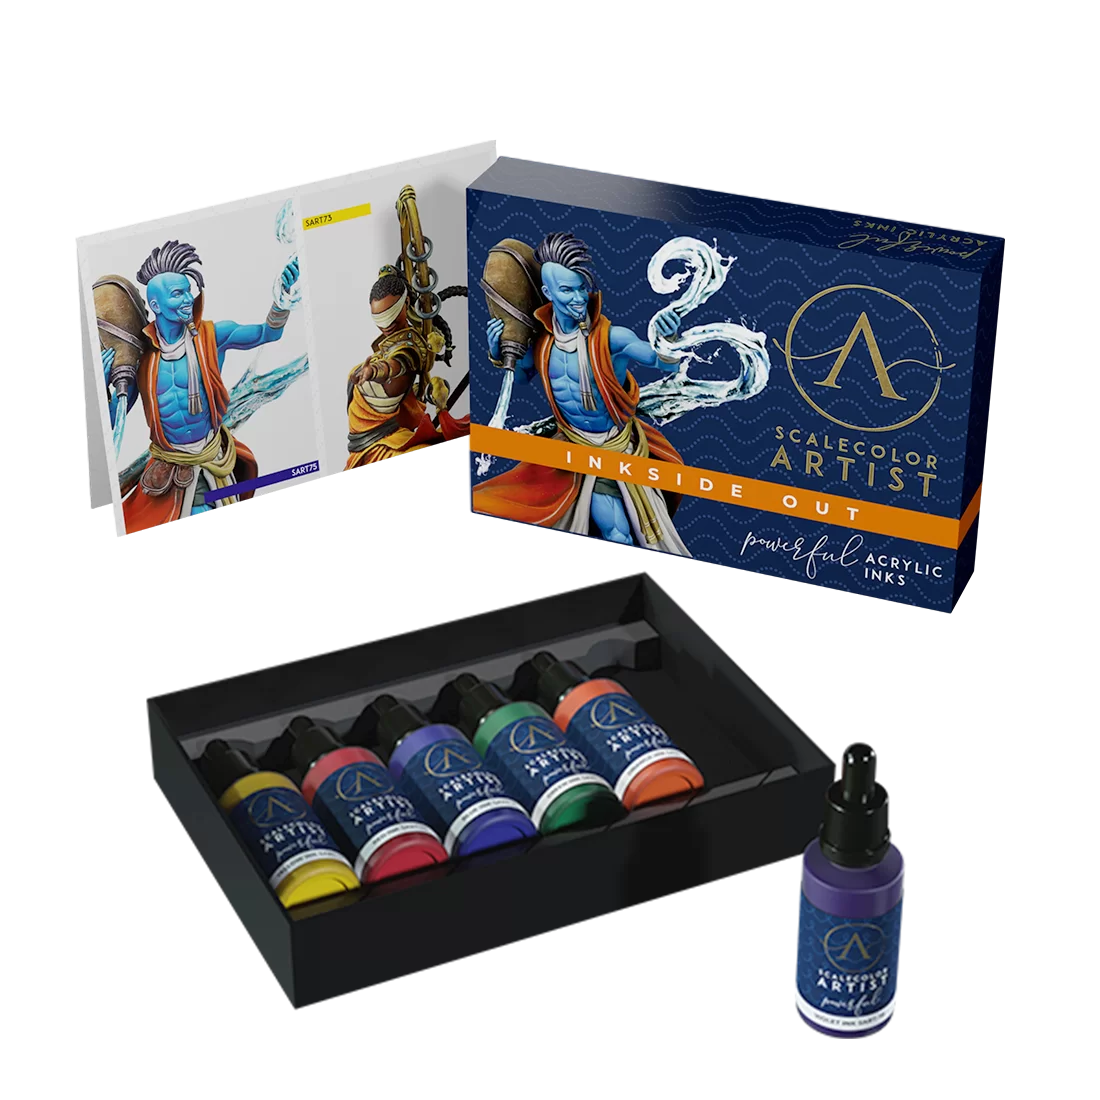 Scale 75 Scalecolor Artist Inkside Out Paint Set